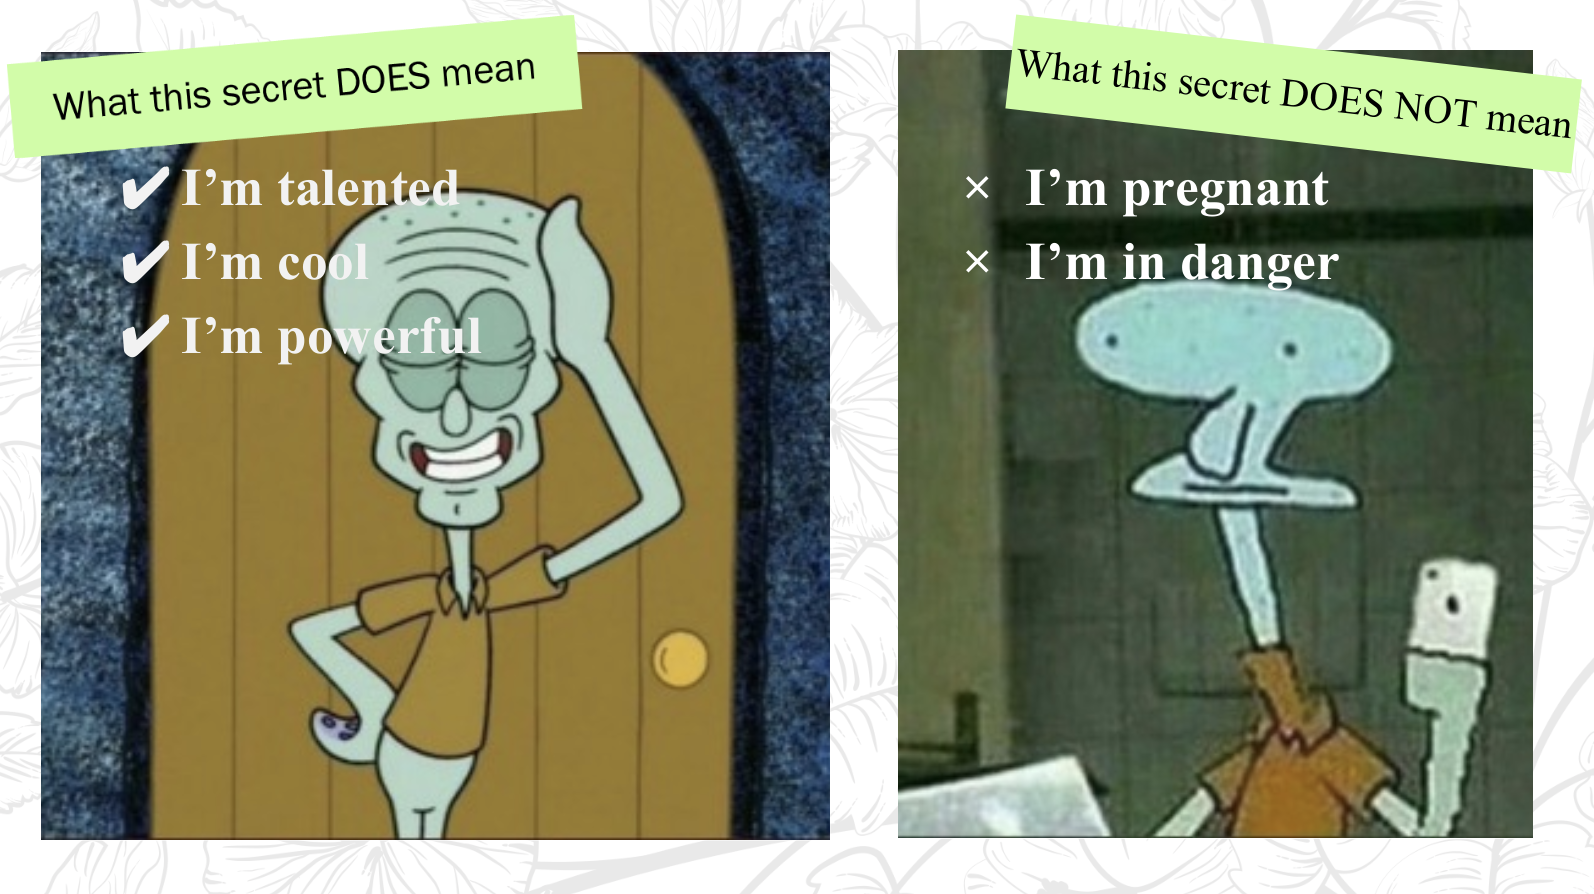 Handsome Squidward to show what the secret does mean, and a not-so-handsome Squidward to show what the secret does not mean